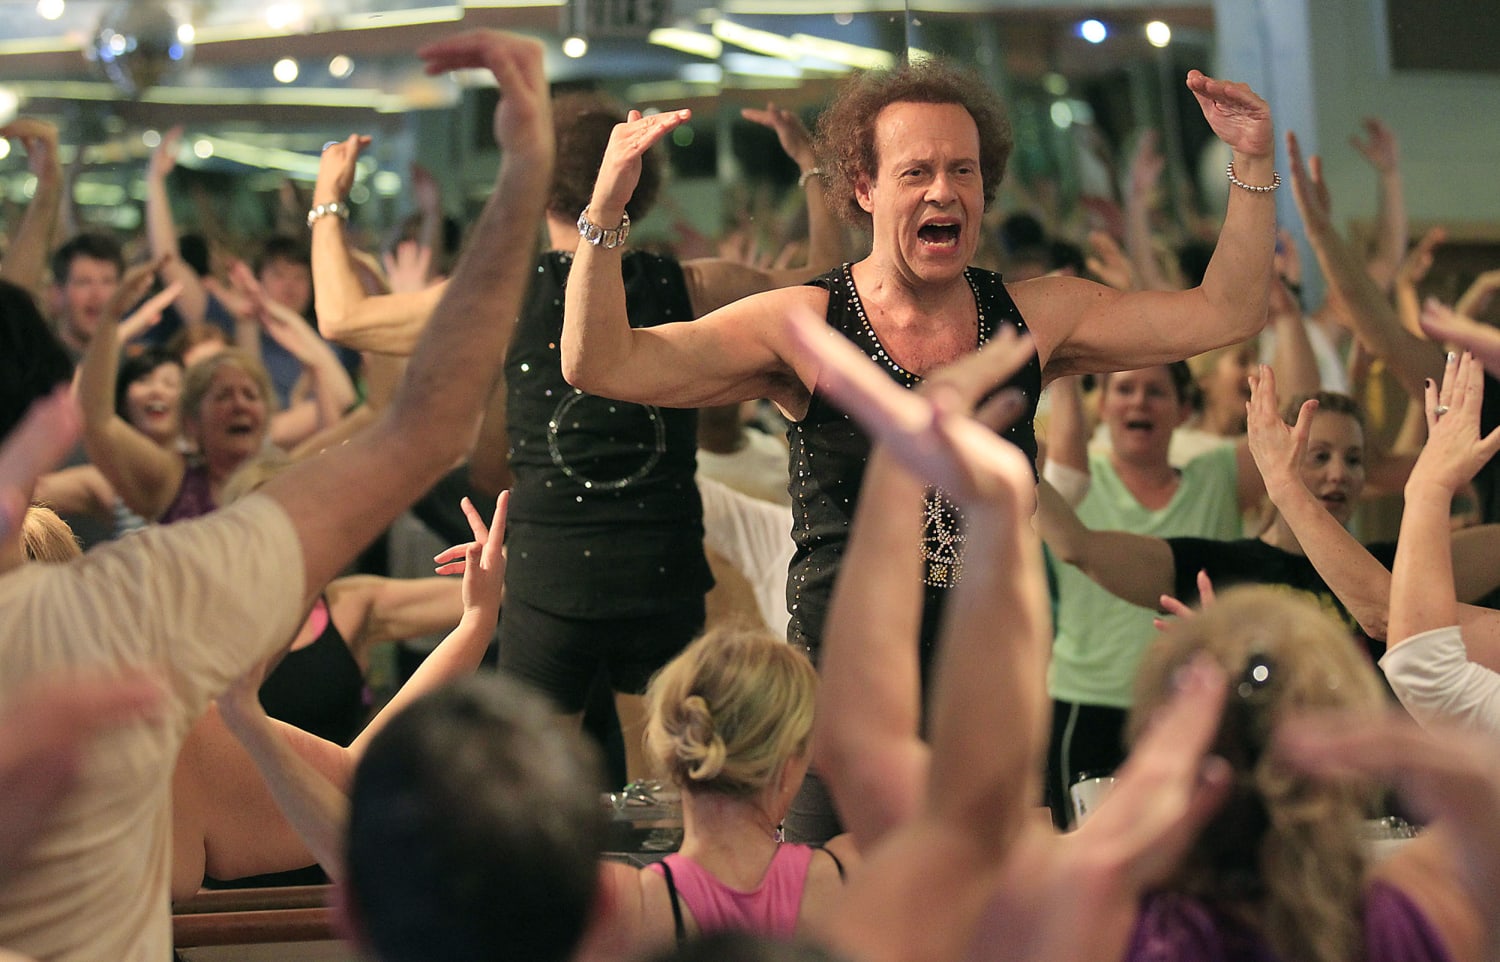 Richard Simmons explains he's not dying after a mysterious social media post